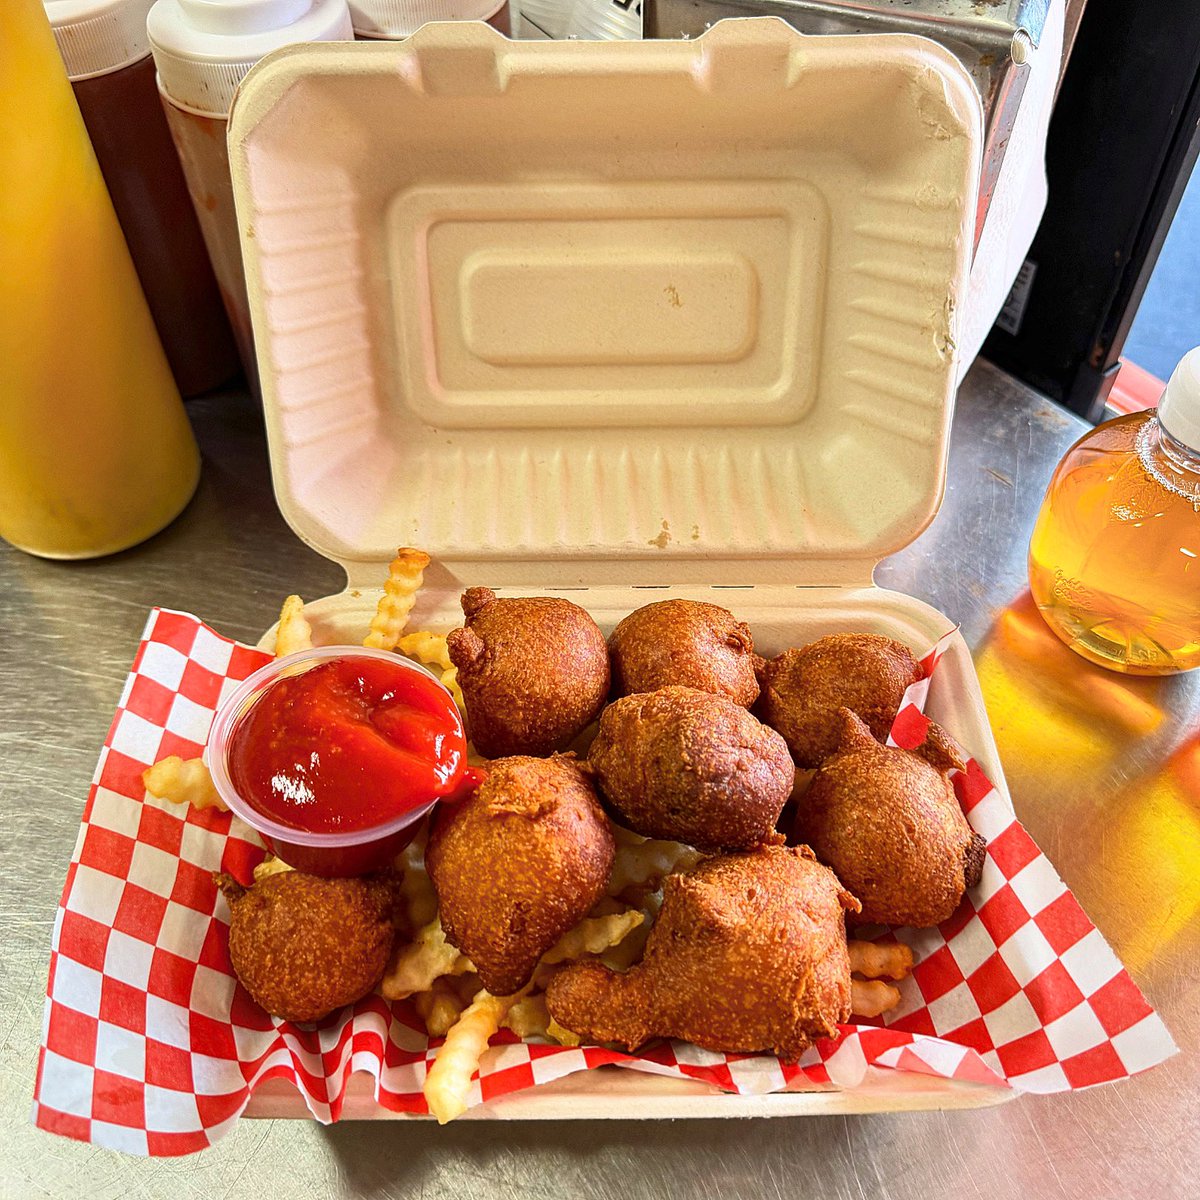 Batter Up Truck is at Spark Social SF for brunch today. Grab a box of mini Corndog Bites and fries to make your Sunday complete!
.
.
.
.
.
#batterupsf #batteruptruck #corndog #bite #bitesize #fries #box #togo #sundayvibes #sparksocialsf #sffoodie #nomnom #betterthandisneyland